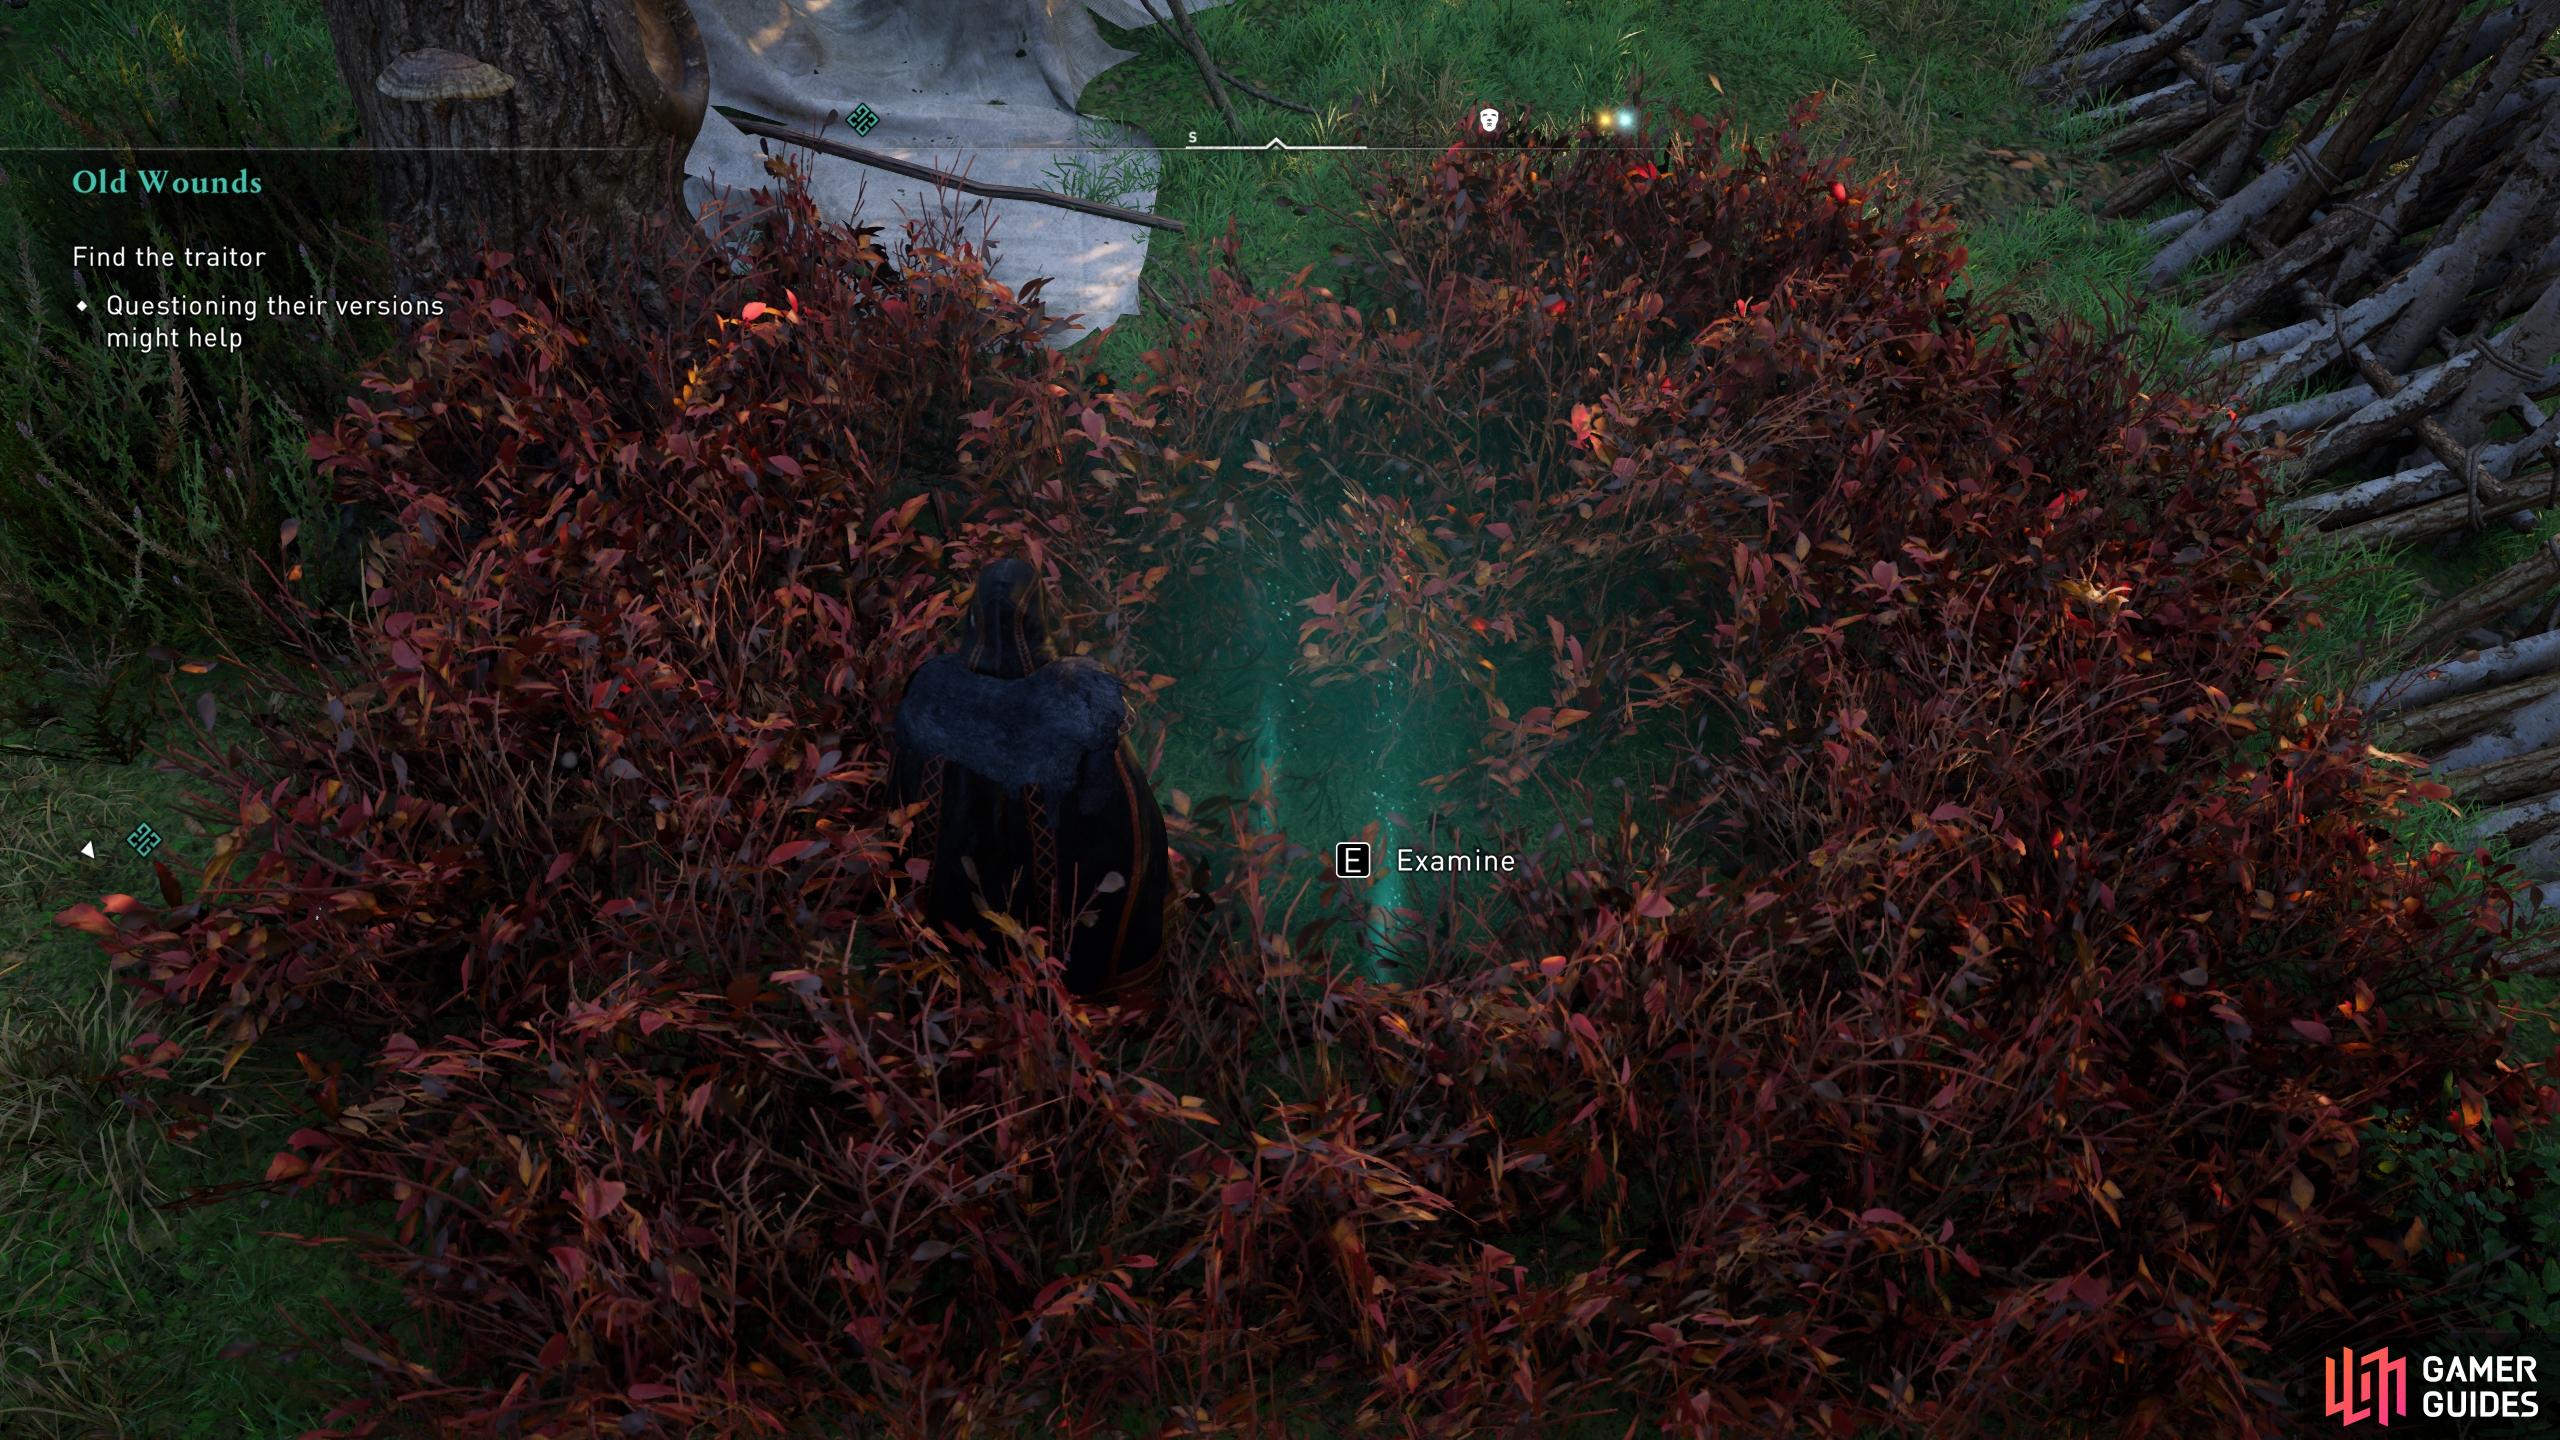 Examine the bushes within the camp as evidence.